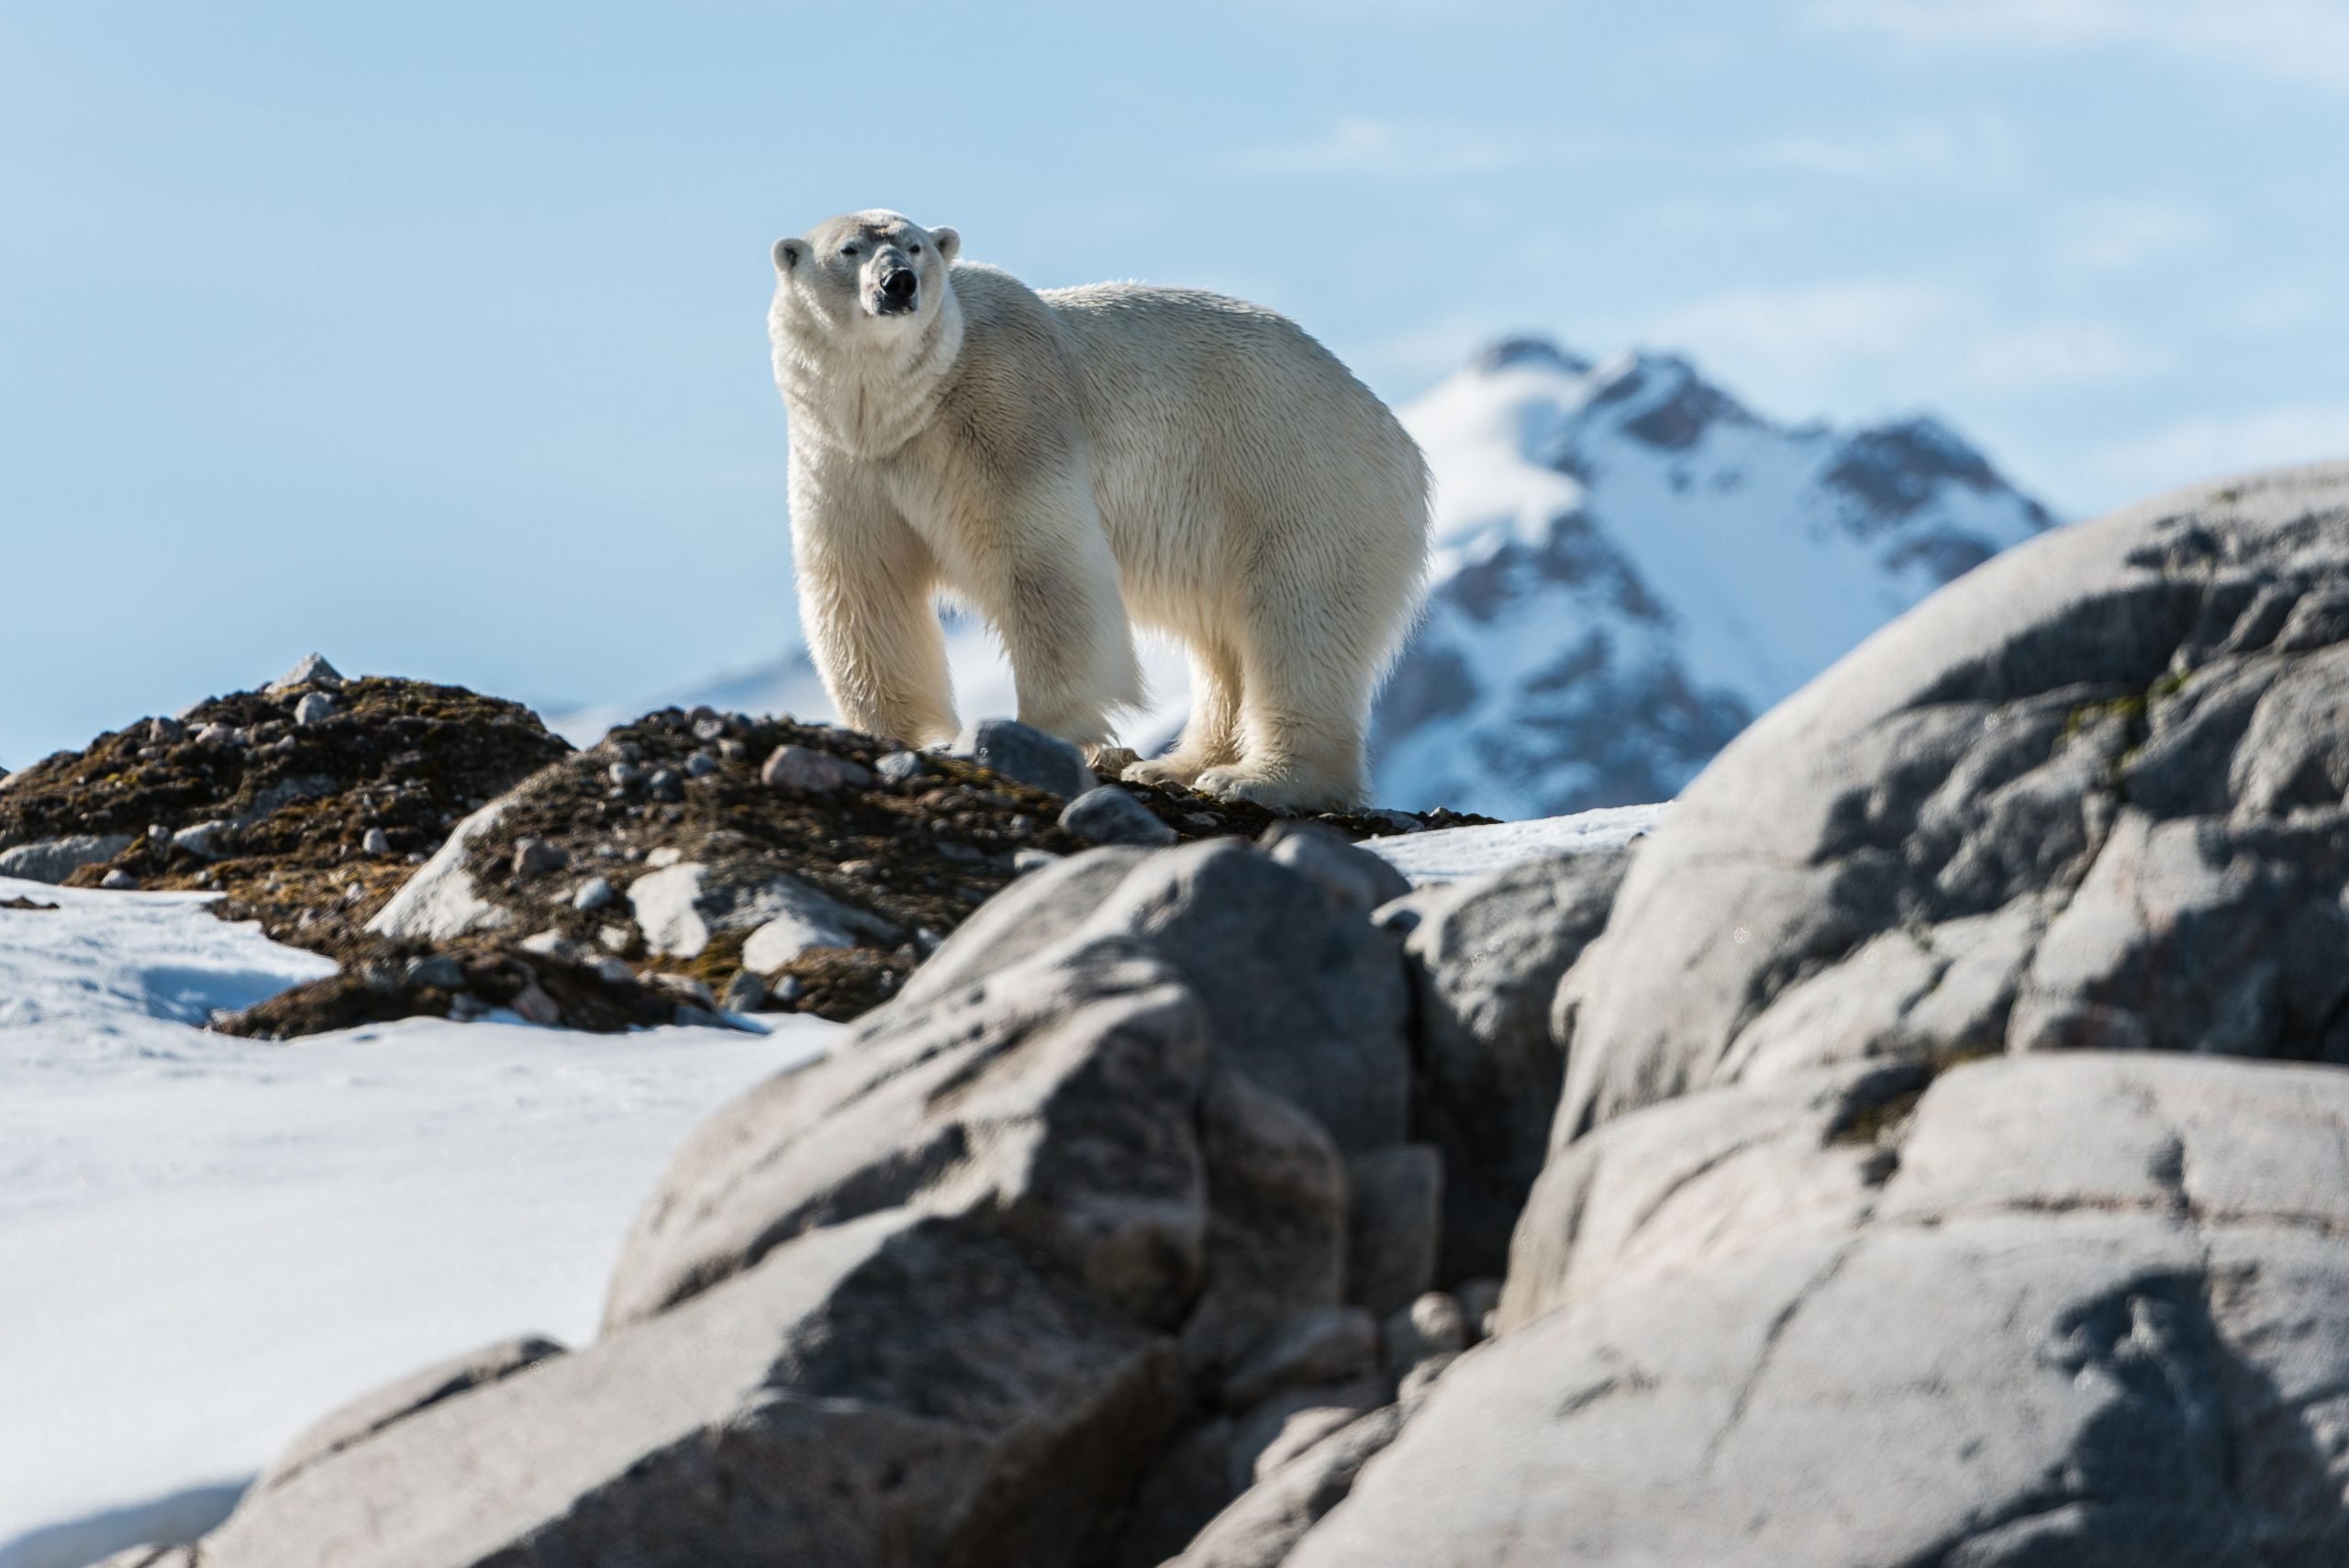 A polar bear in the icy wastes of Svalbard, in the Arctic Circle.